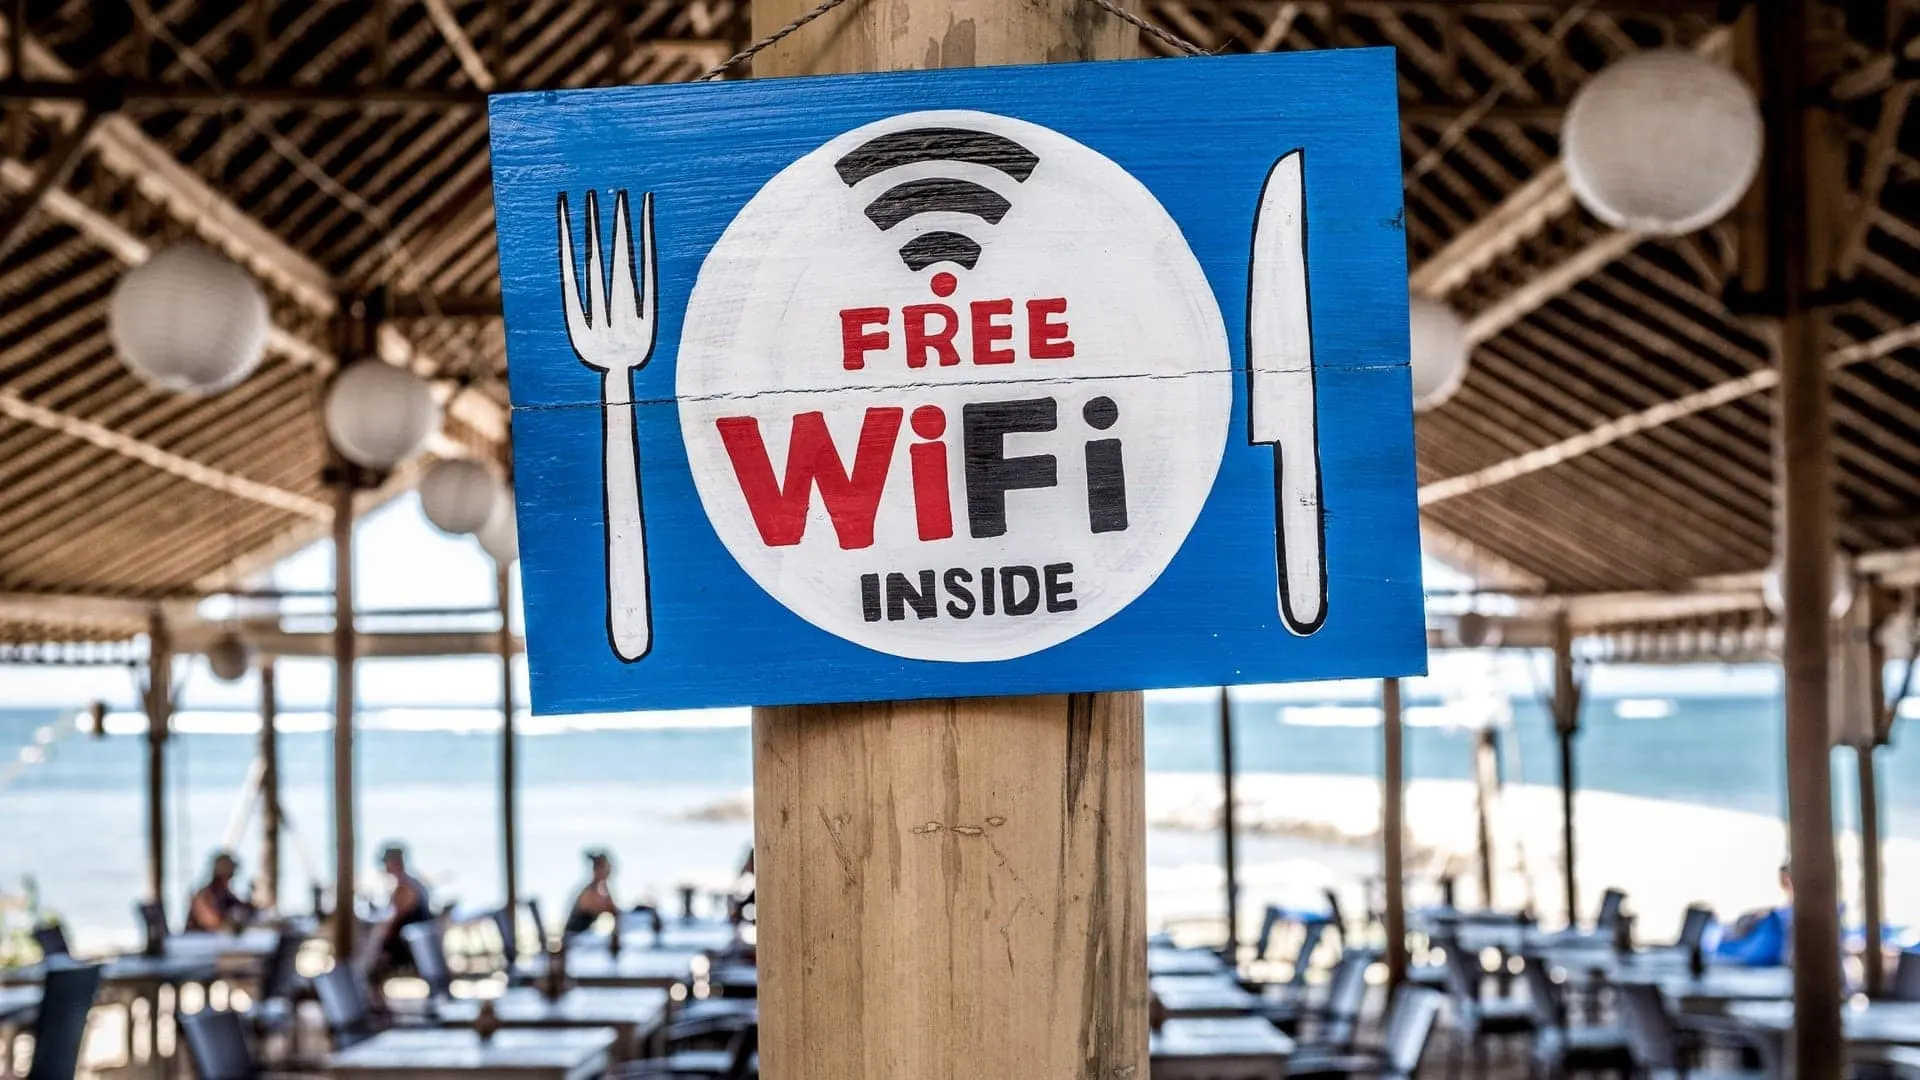 Free WiFi is one of many RV internet options.